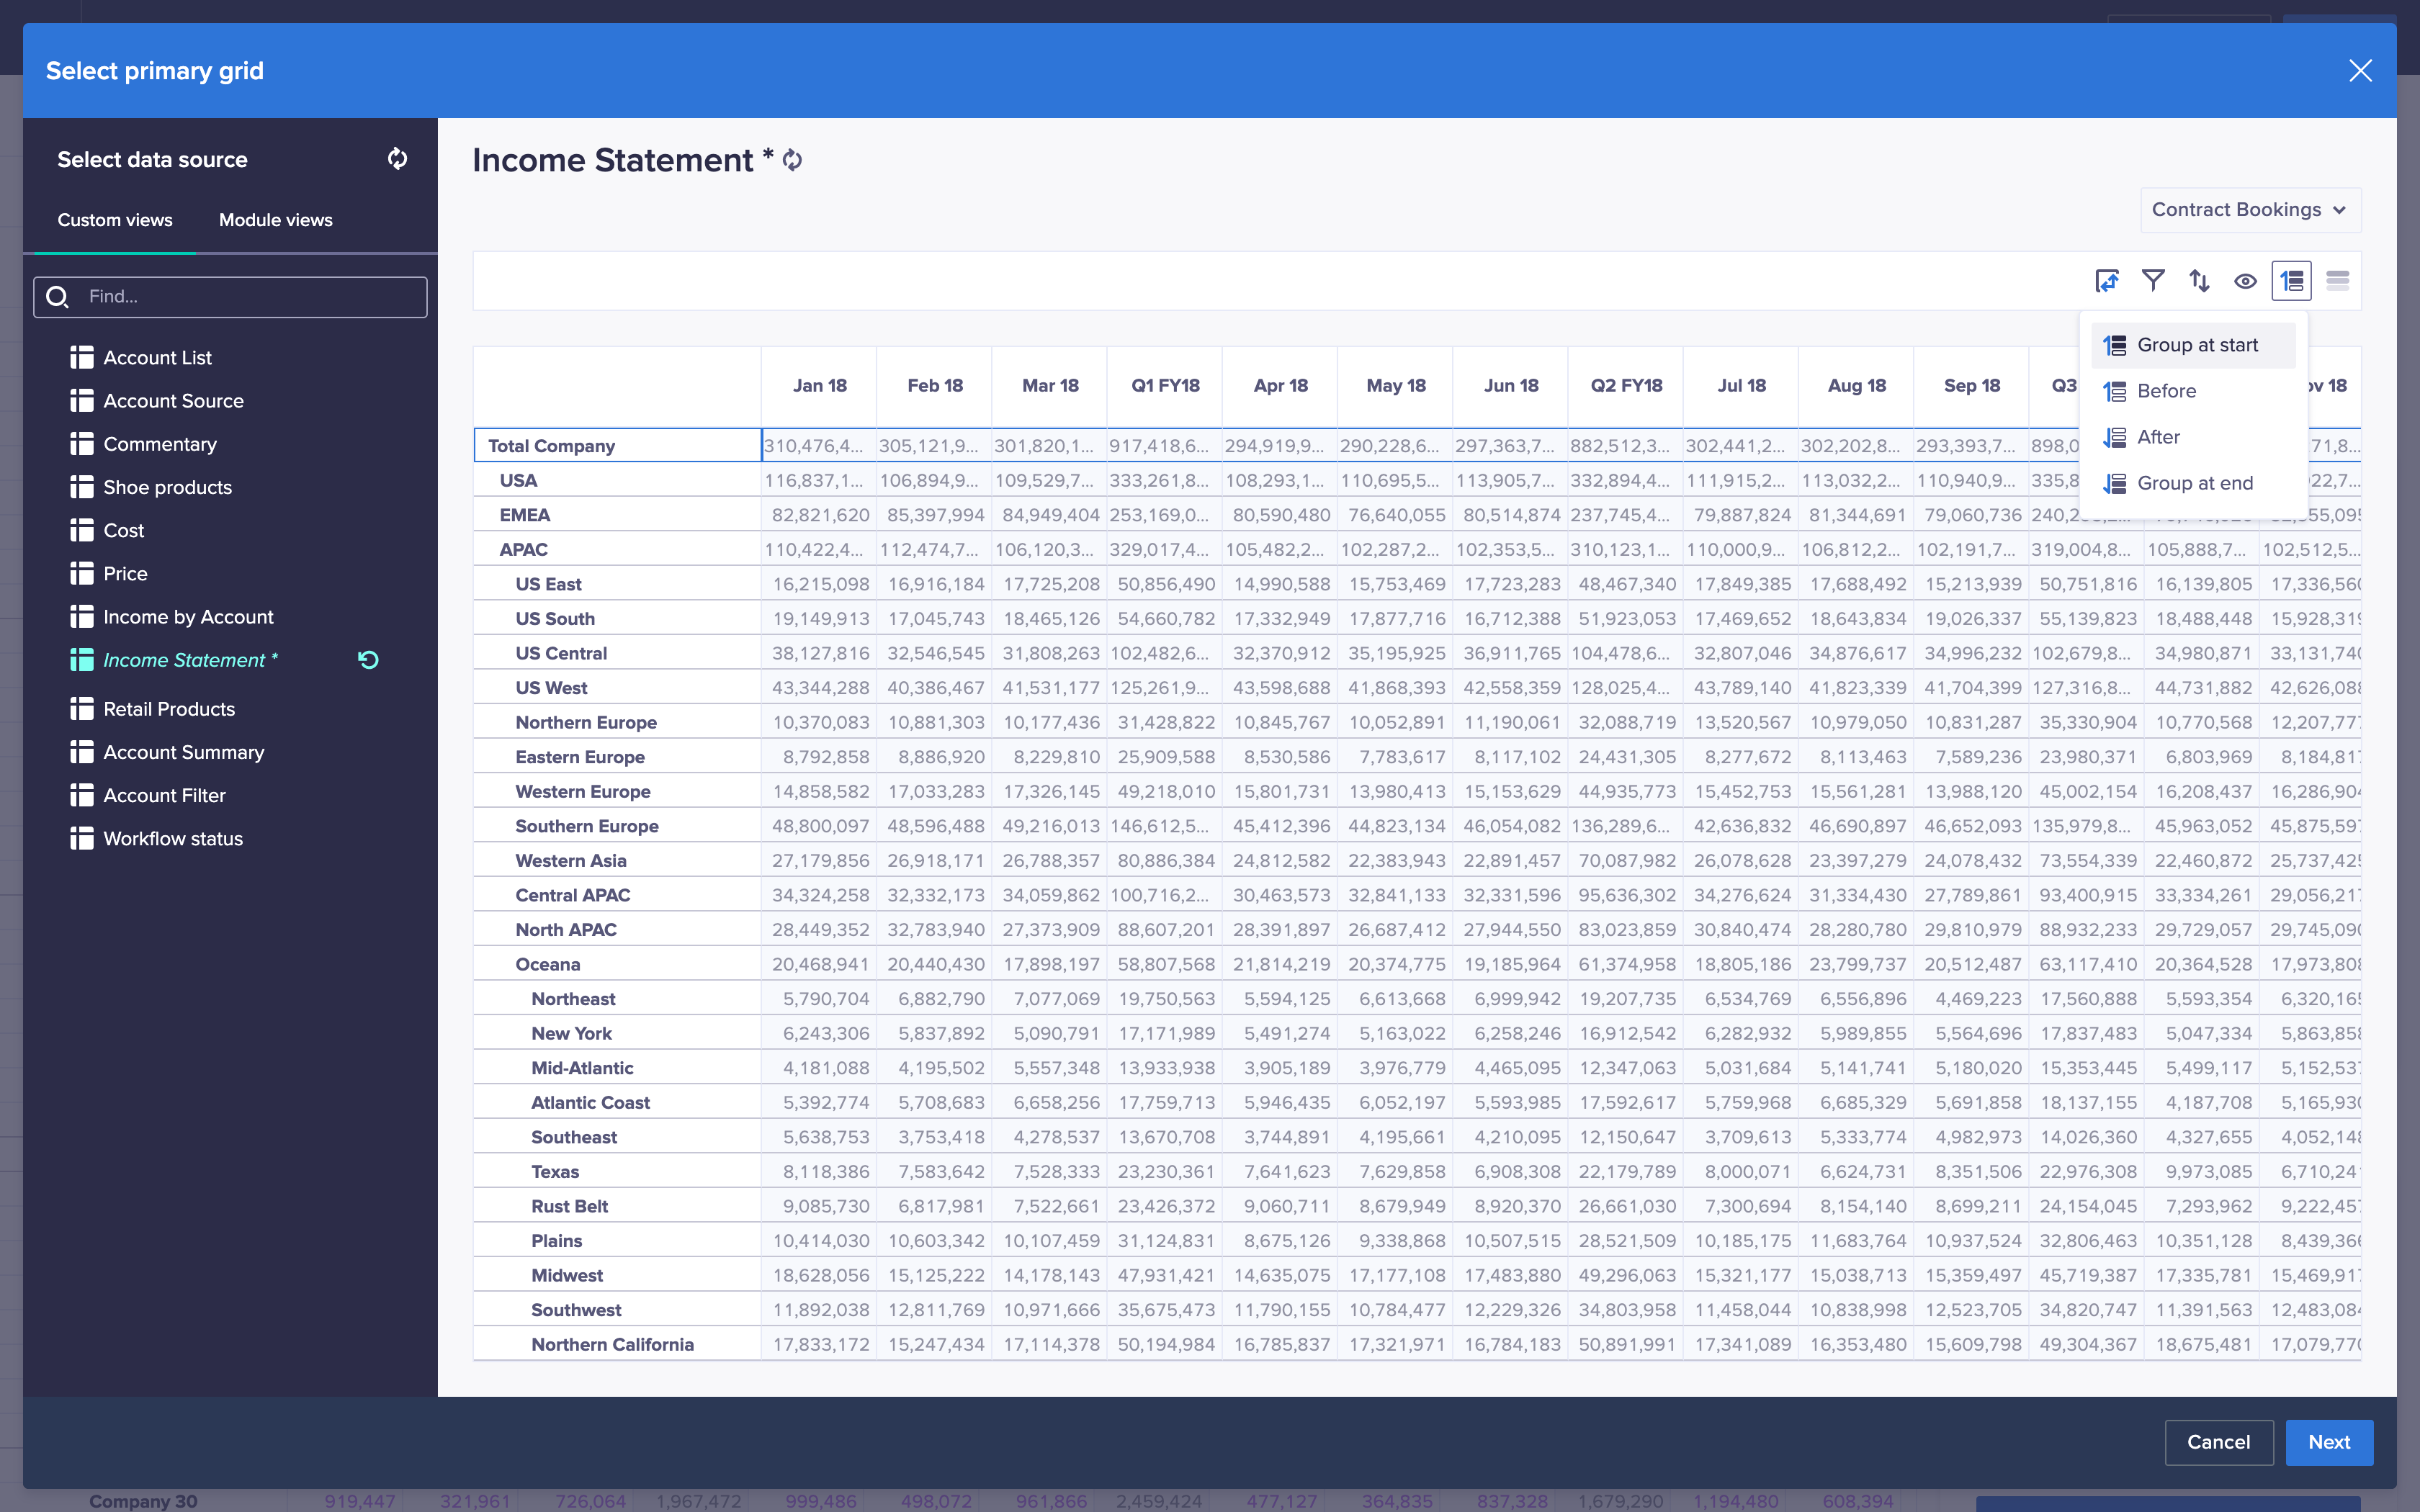 The Select primary grid dialog. A module called Income Statement is selected, and the Totals position icon clicked. The Group at start option is selected in the drop-down menu.